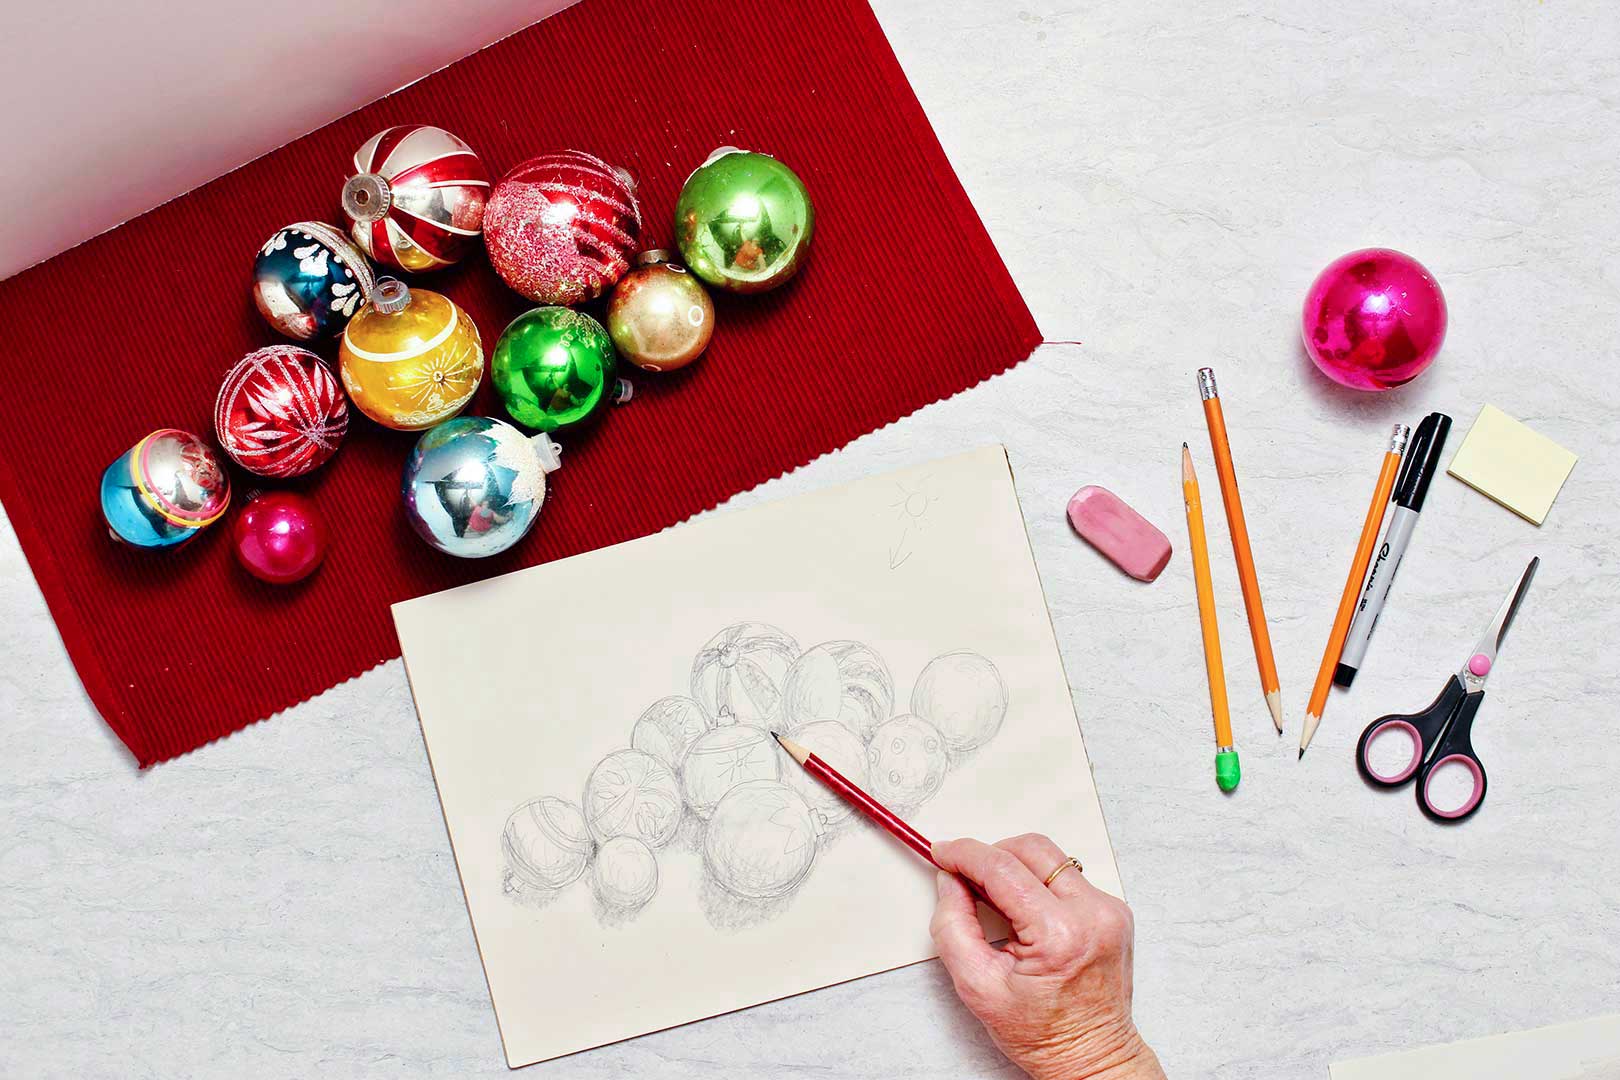 Christmas ornaments lay on a red placemat. A hand holds a red pencil and shades finishing touches on the drawing.